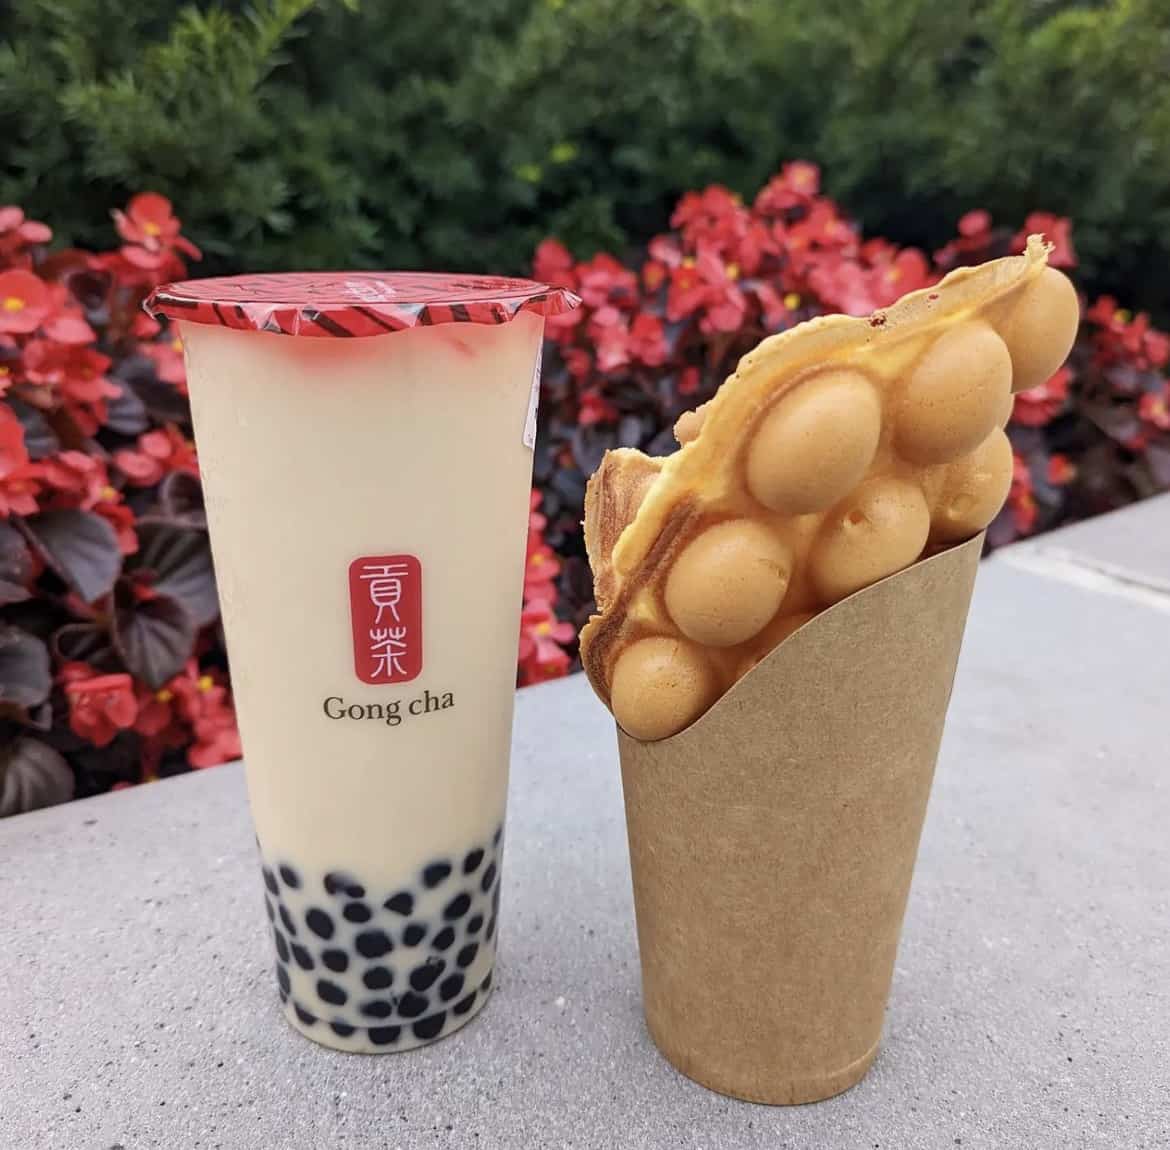 Best-bubble-tea-spots-mississauga-gong-cha